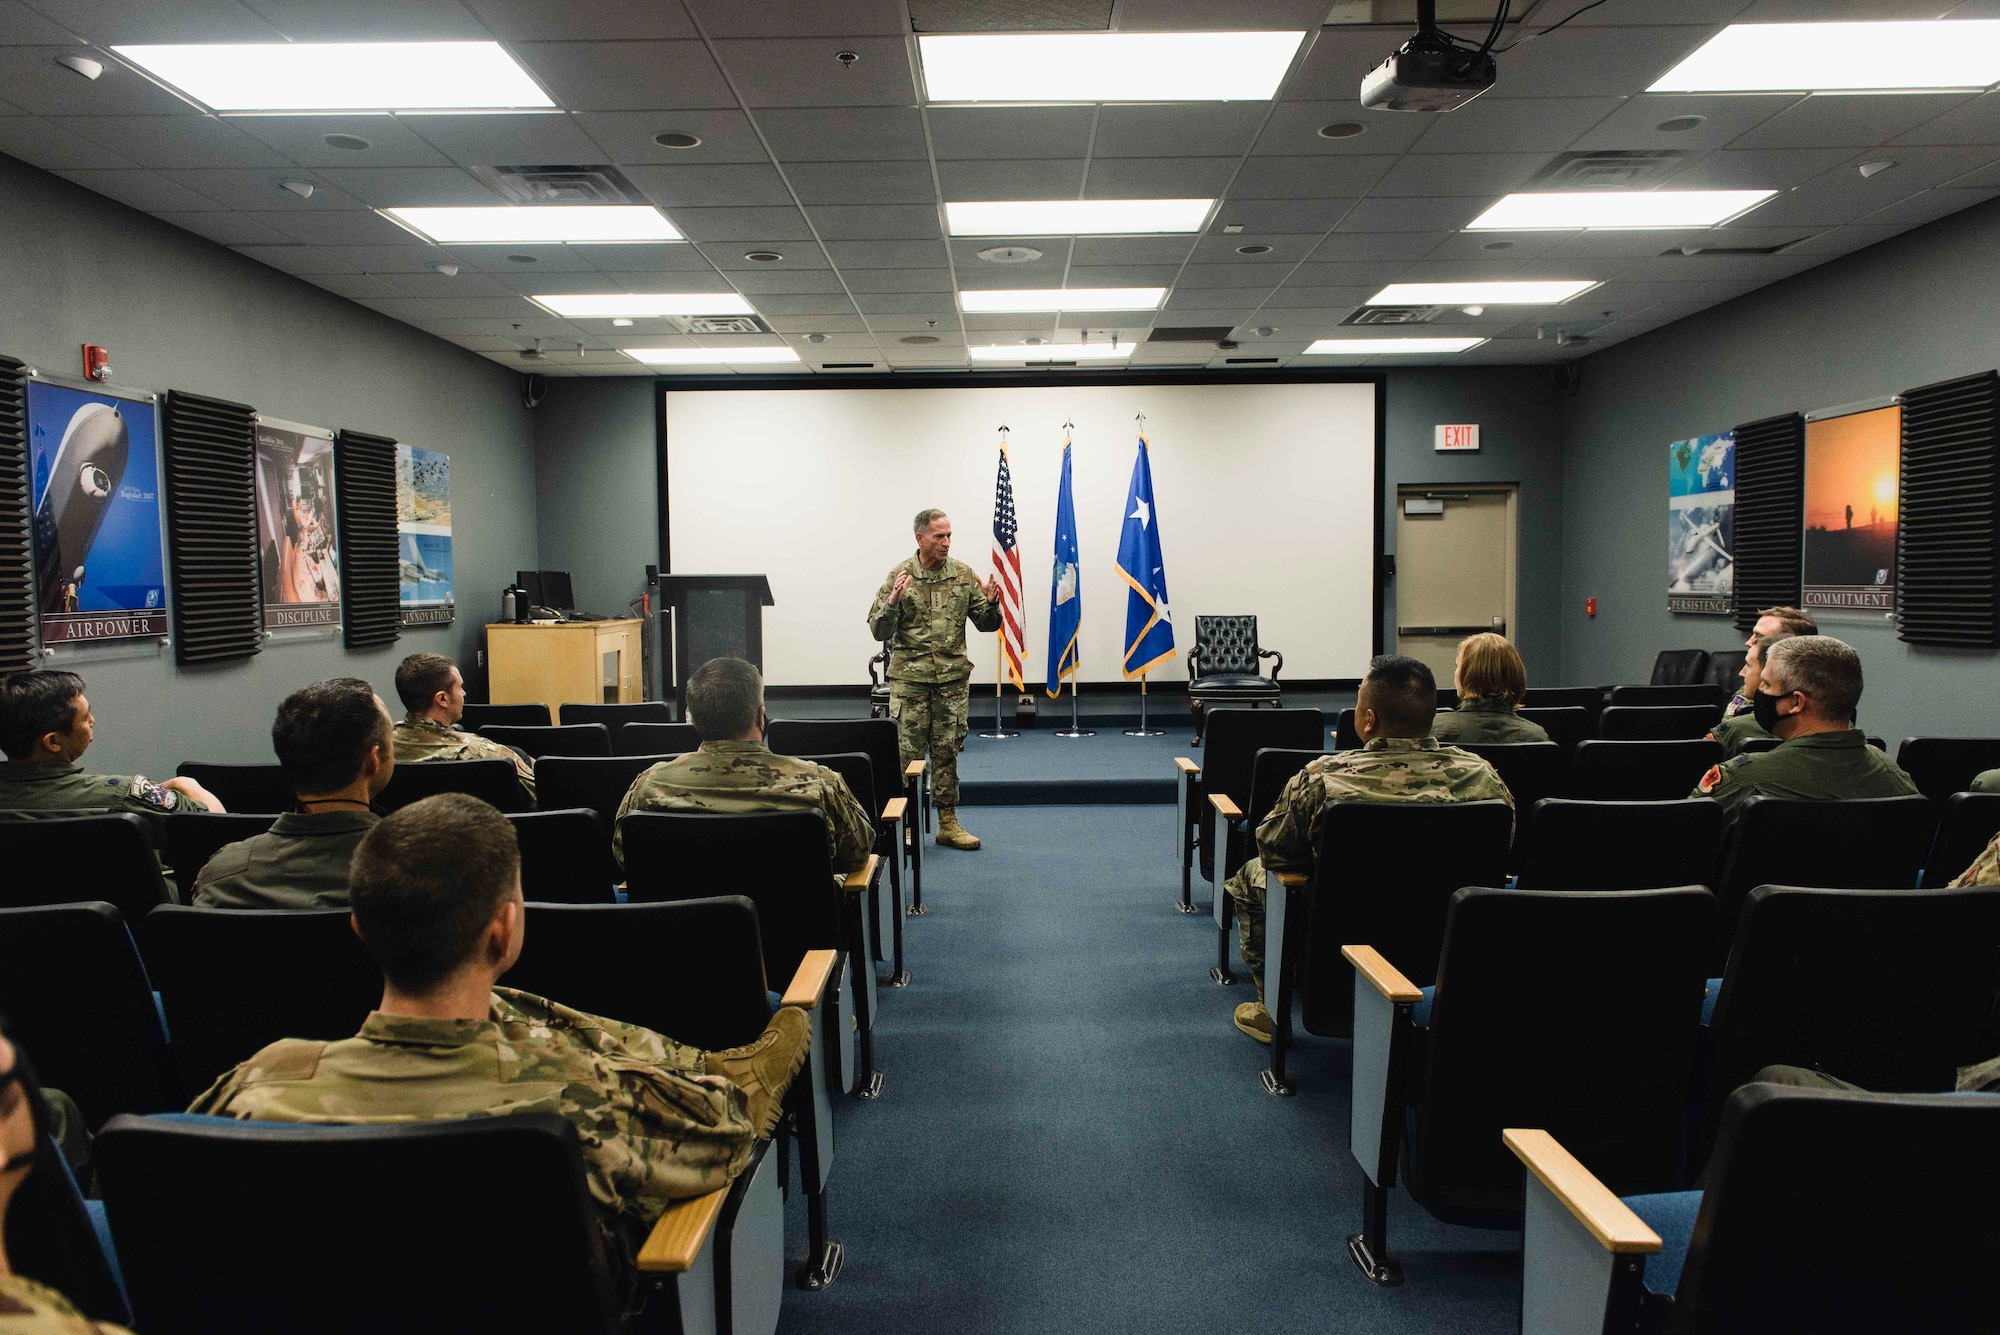 Air Force Chief of Staff Gen. David L. Goldfein speaks to squadron leadership in a meeting room at Creech Air Force Base